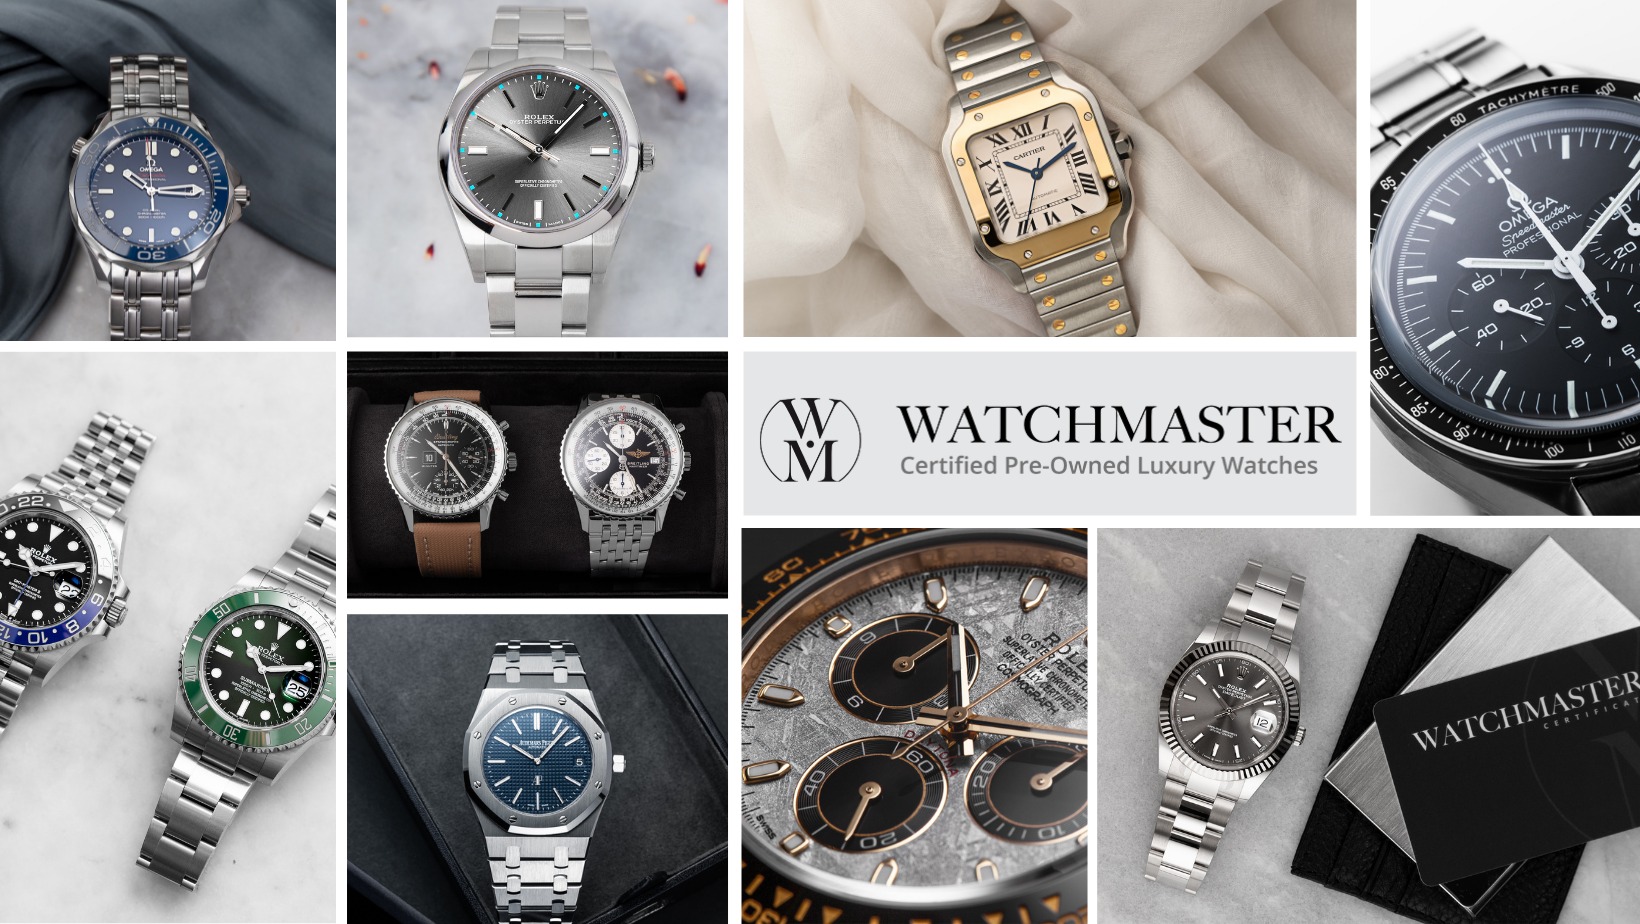 EXCLUSIVE: BQ Watches Recovers Watches From The Wreckage Of Watchmaster ...